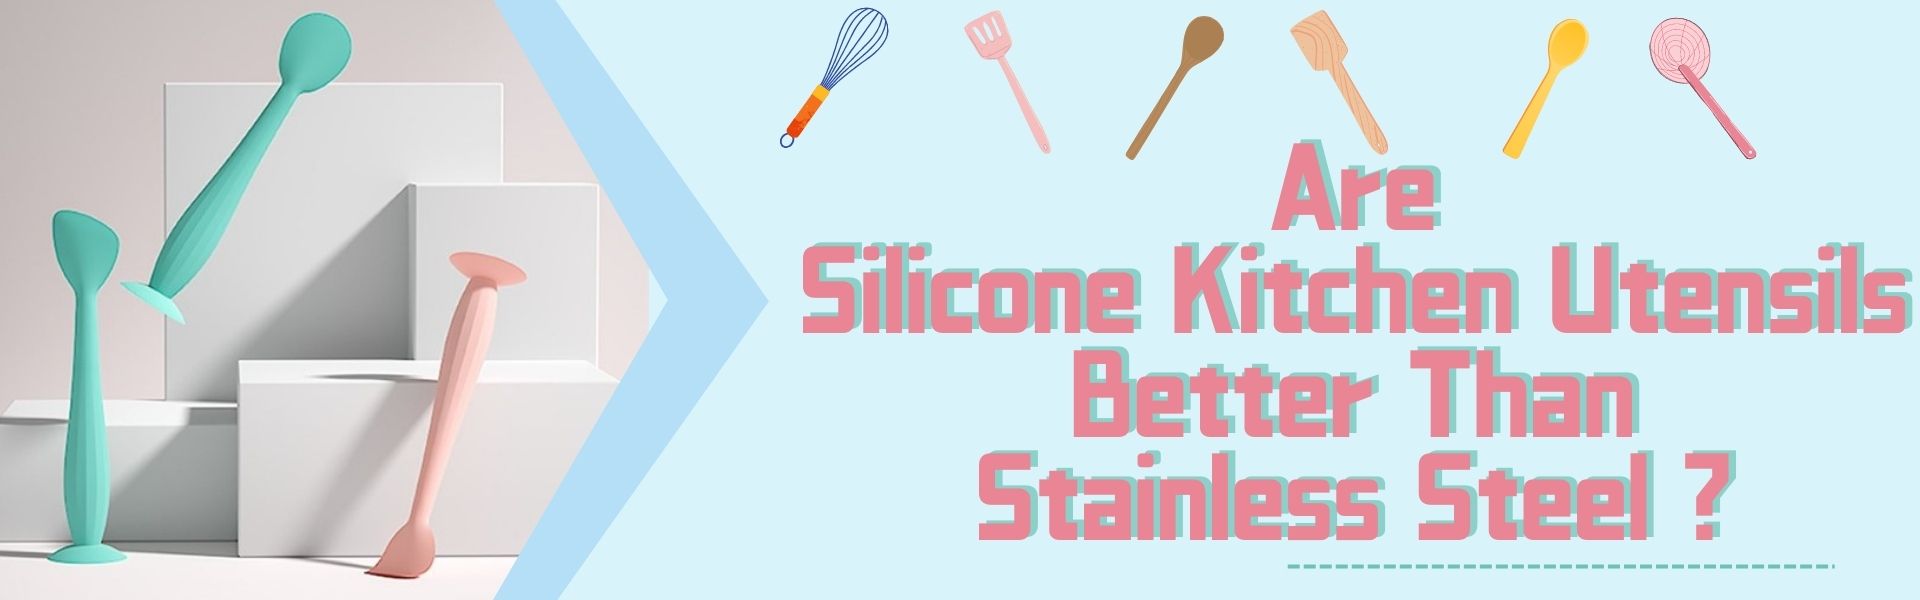 Are Silicone Kitchen Utensils Better Than Stainless Steel?